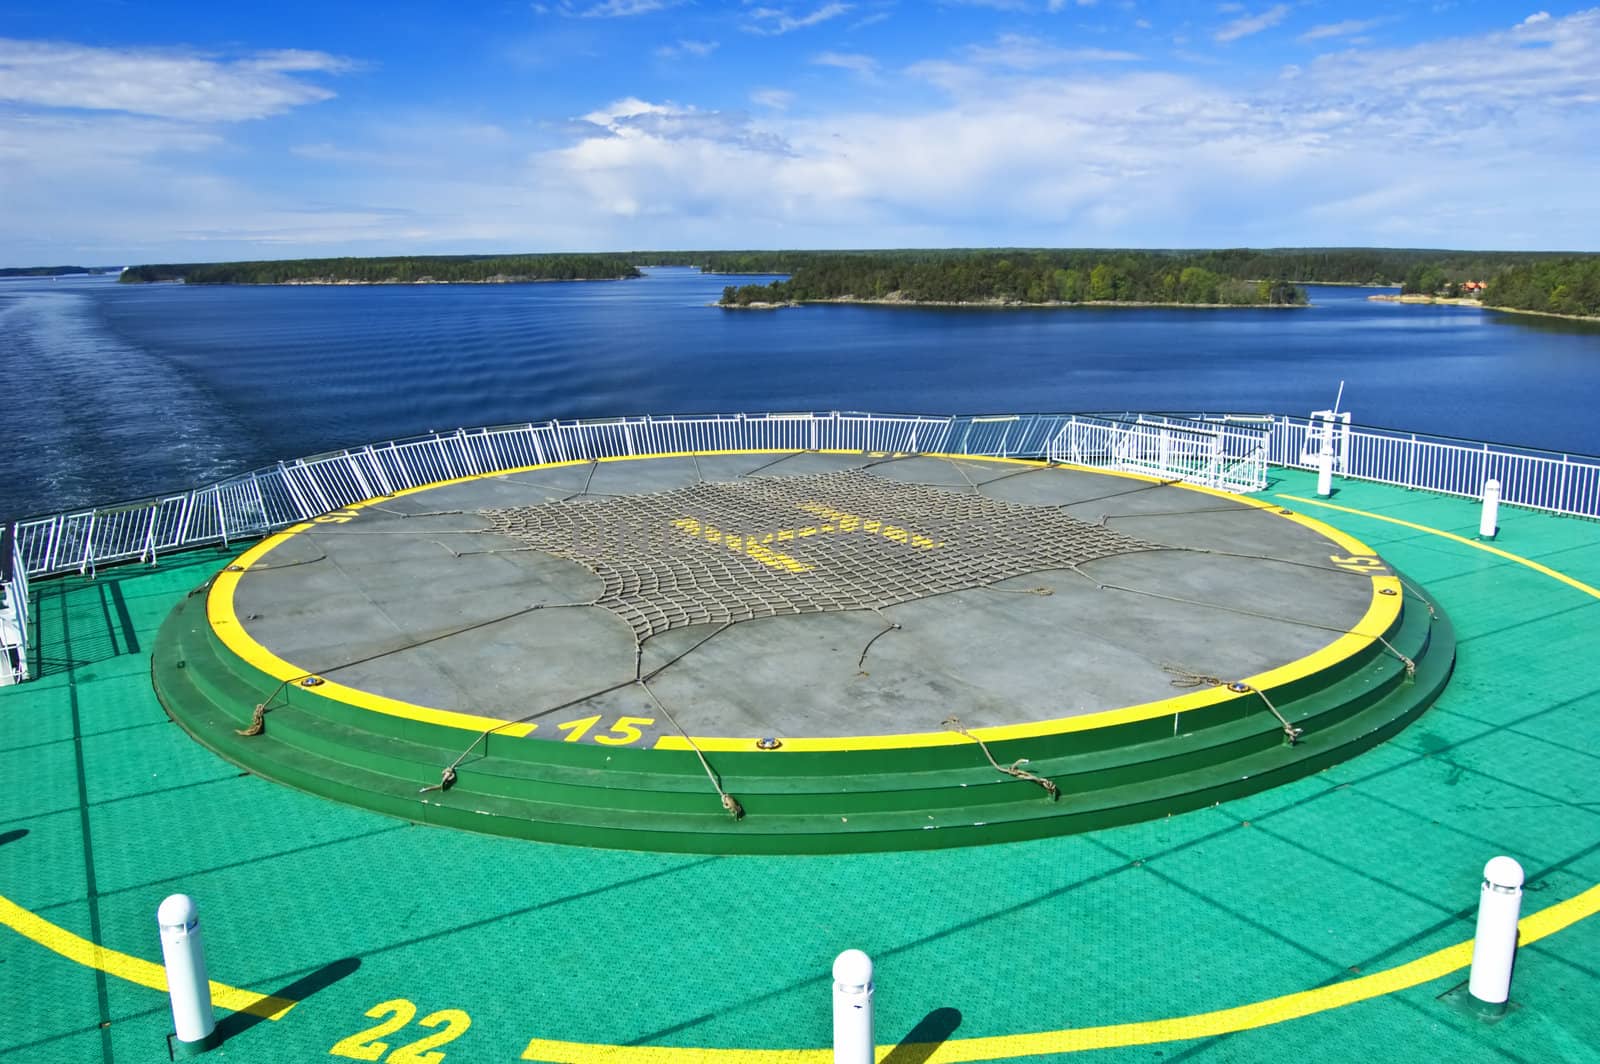 Helicopter landing pad on the cruise ship